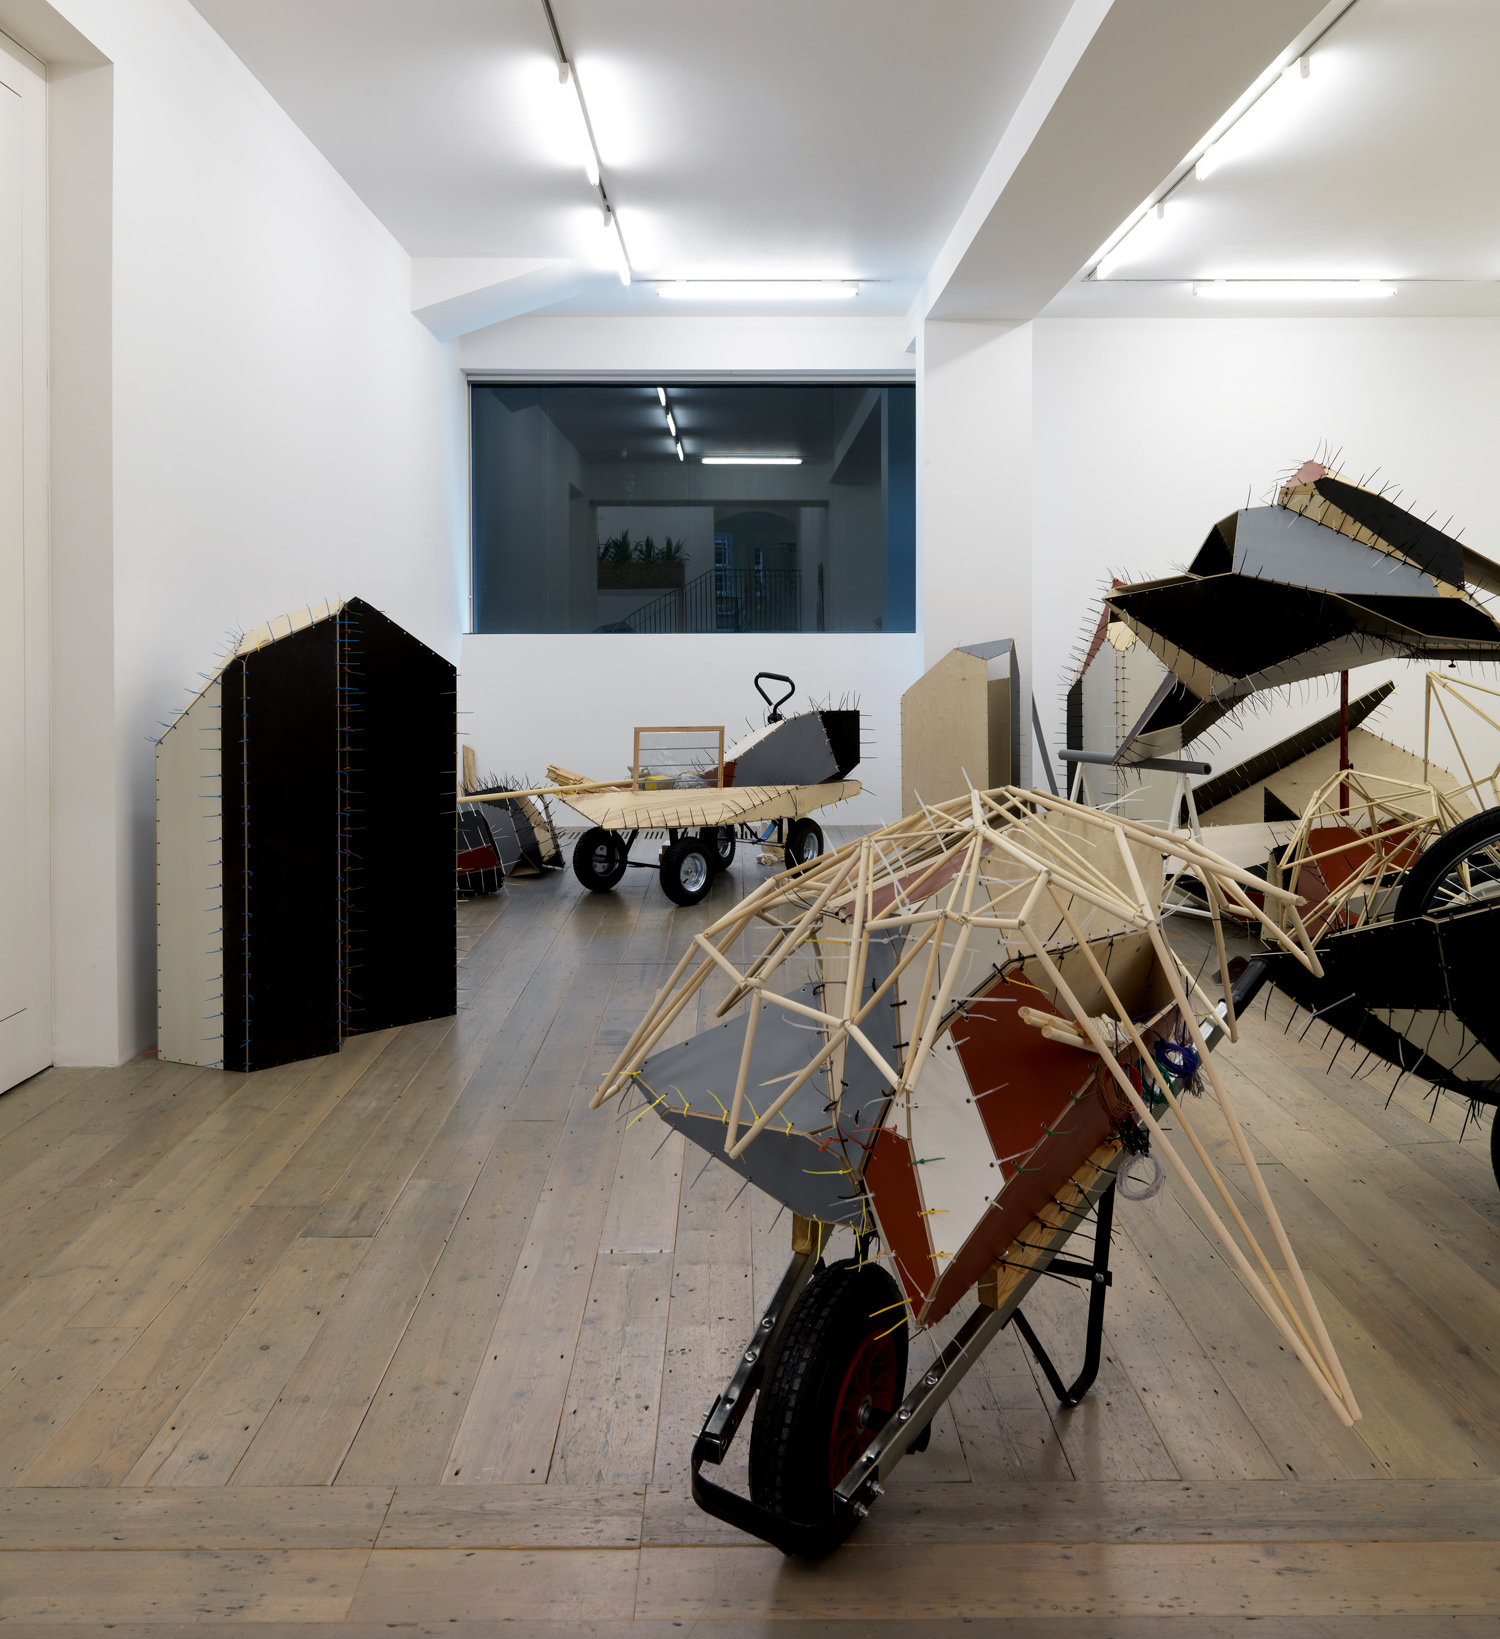 Initial phase of exhibition, as installed at Raven Row, London, 2009